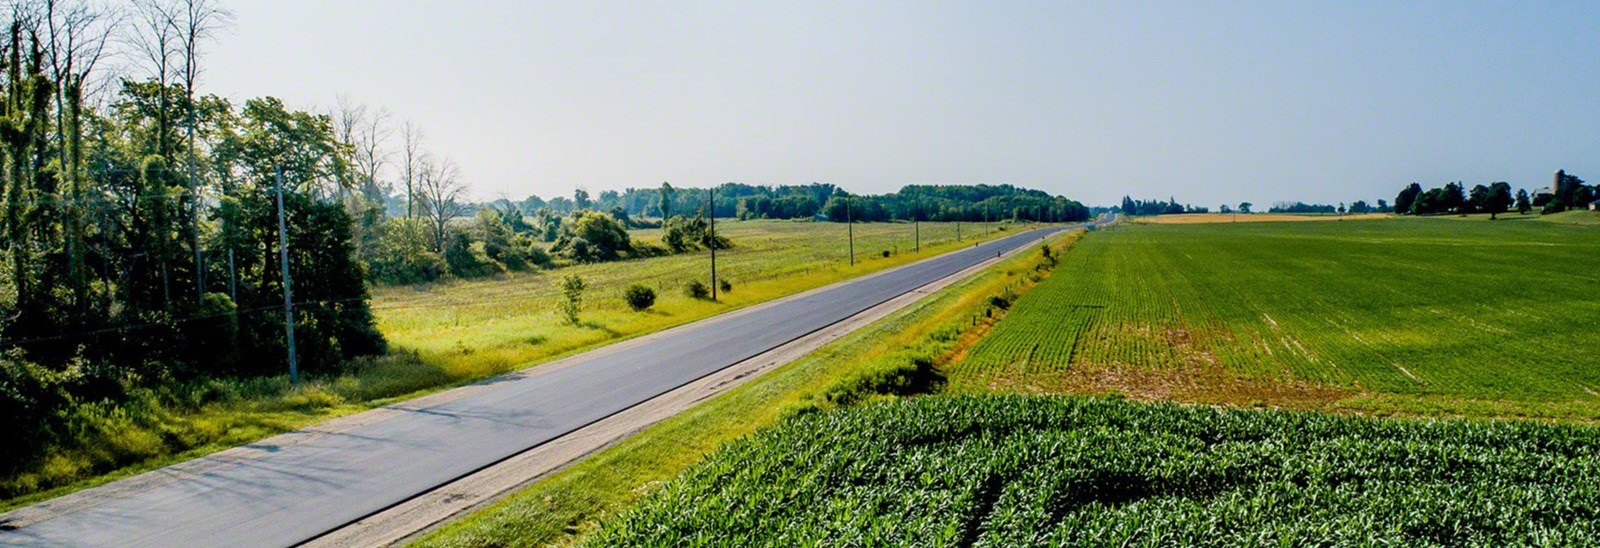 Road in Oxford County